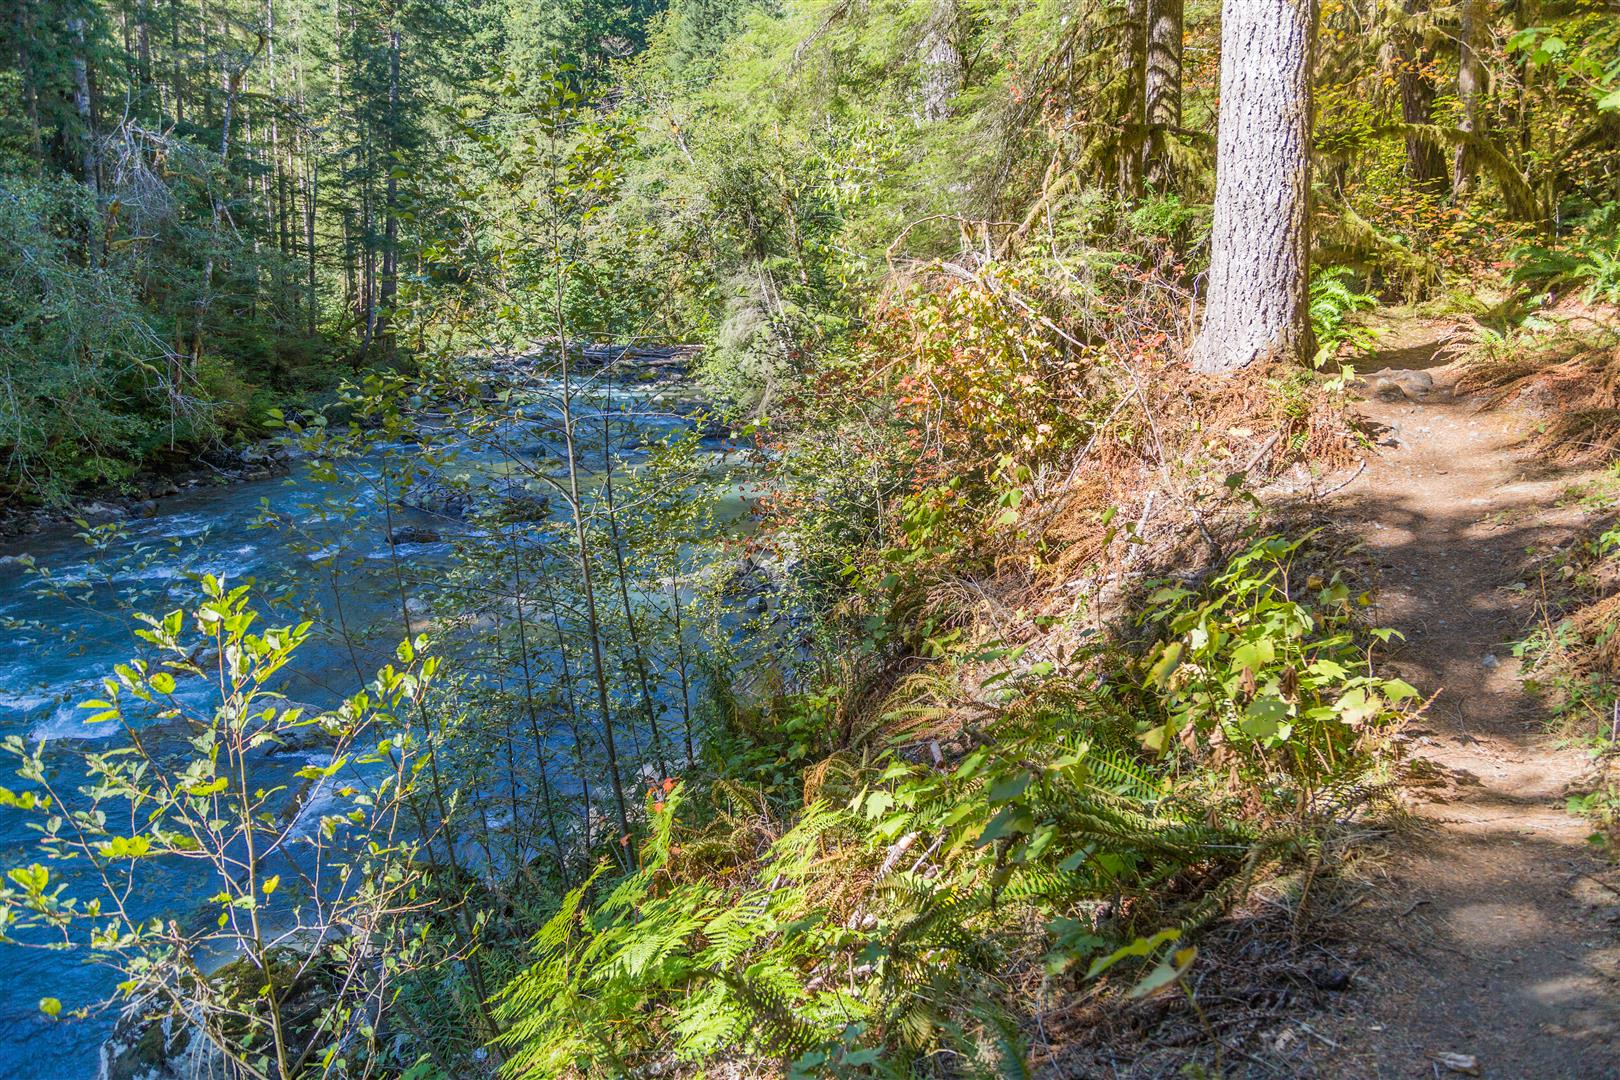 Nooksack River and trail